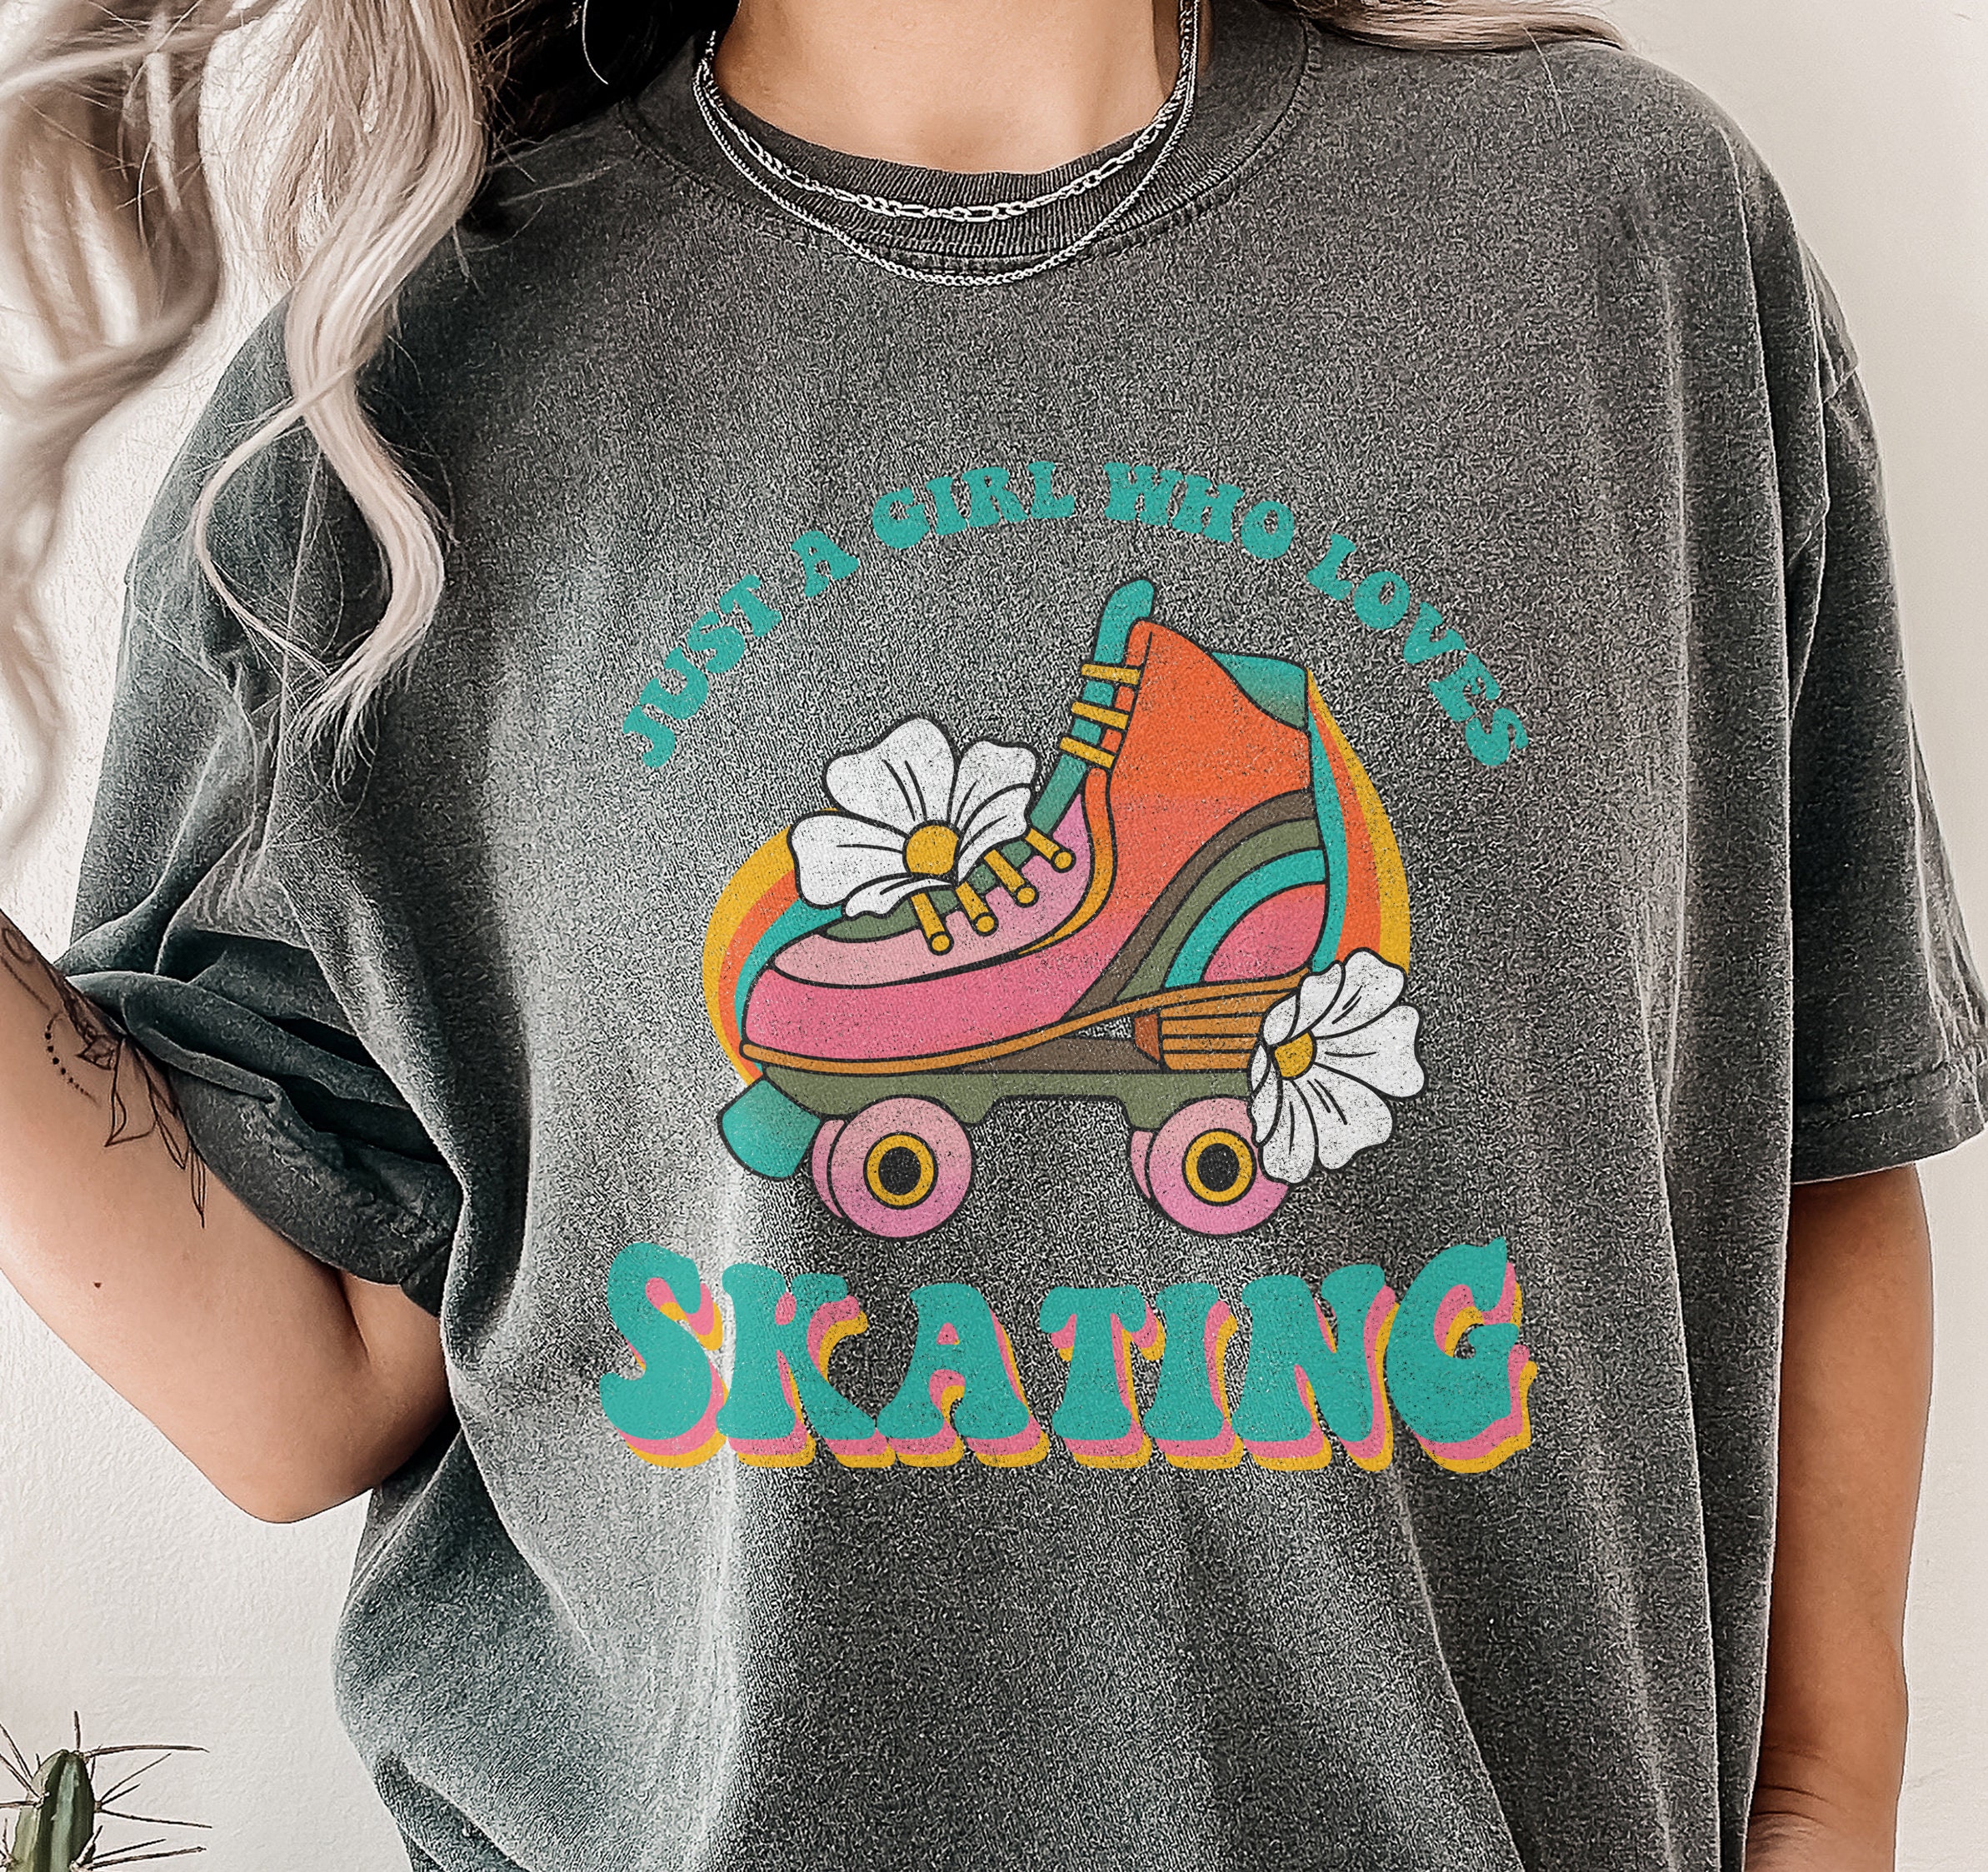 Roller Skating Retro T Shirt | Just A Girl Who Loves Skating Tee | Roller Skating Tee | Vintage Roller Skate Shirt | Groovy Skate Shirt Gift